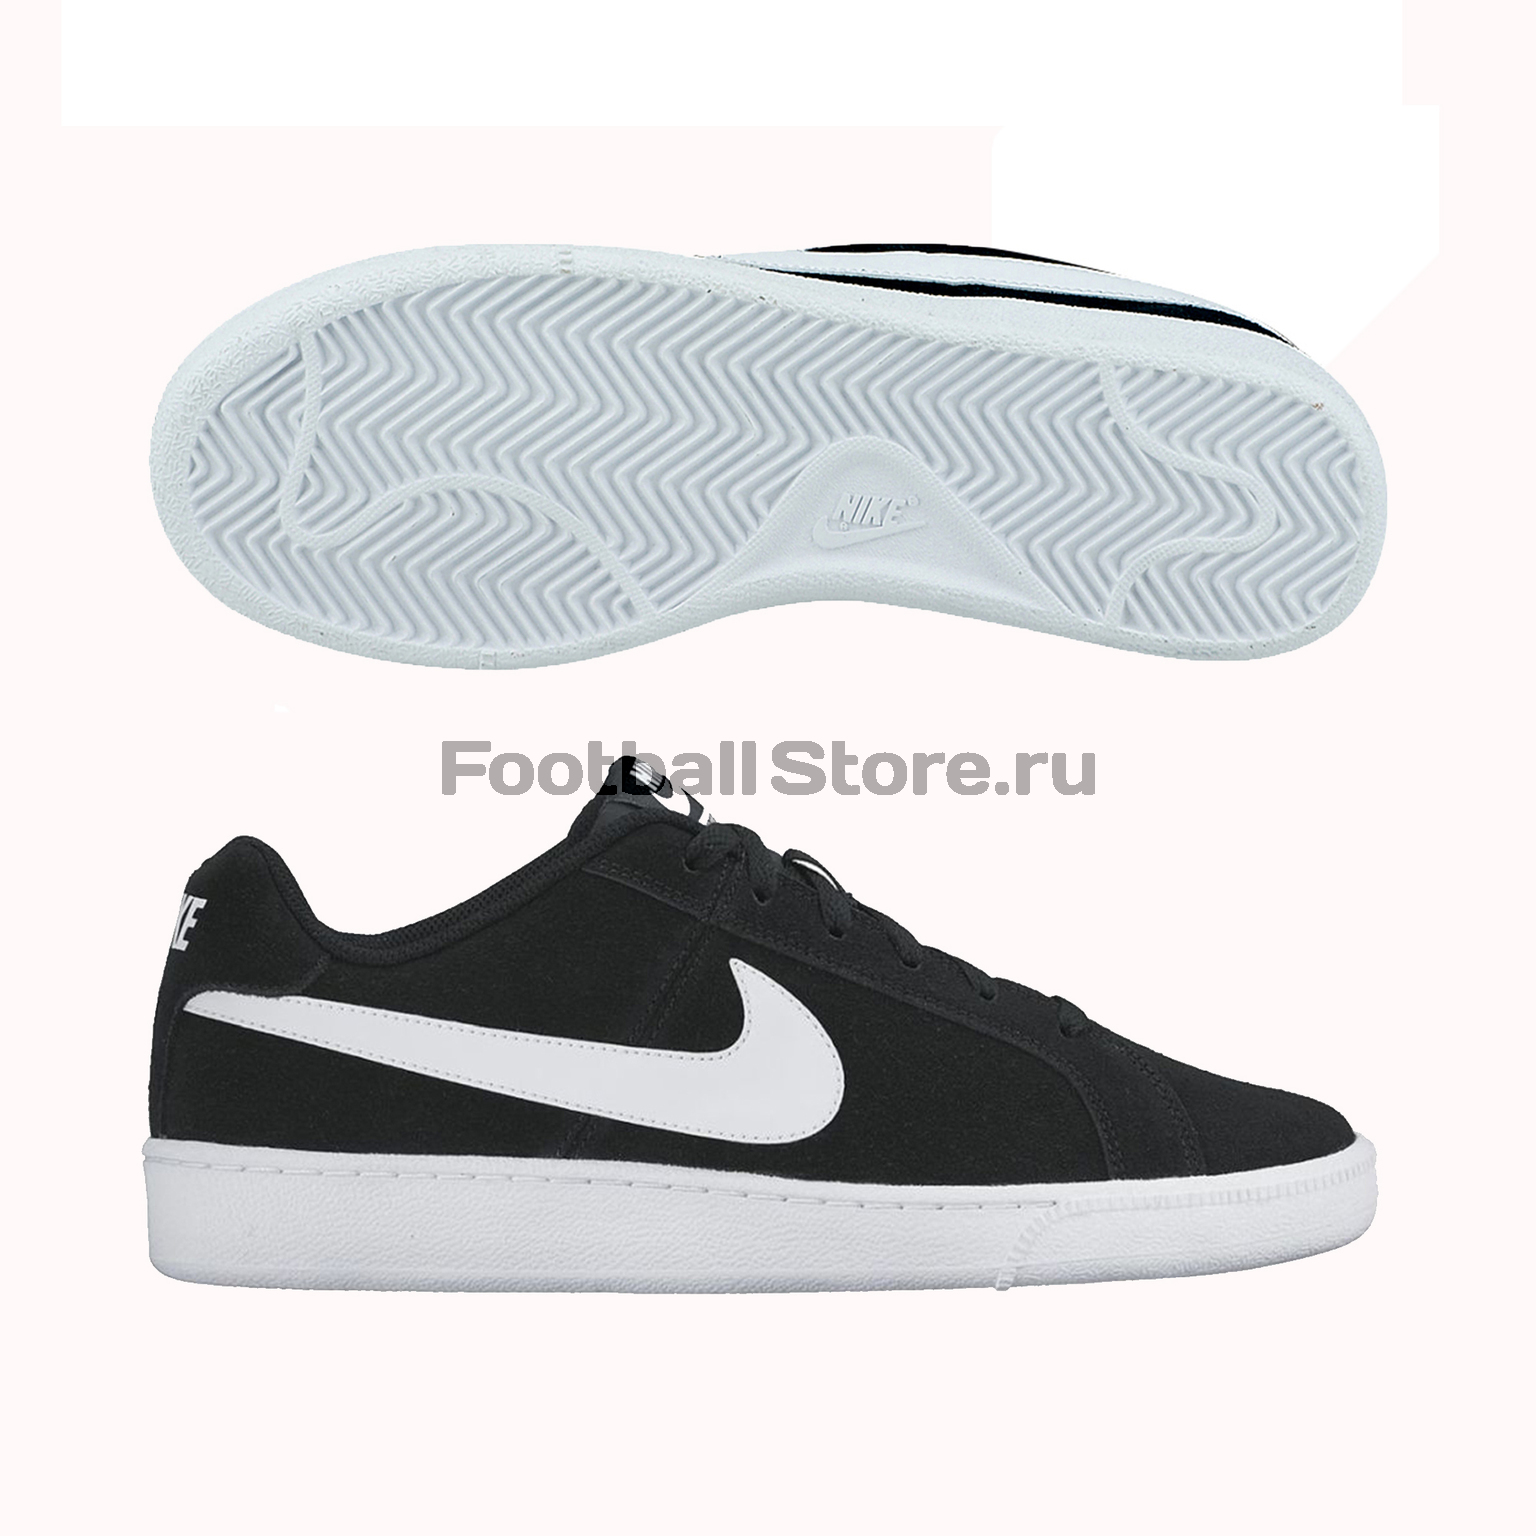 Кроссовки Nike Court Royale Suede 819802-011